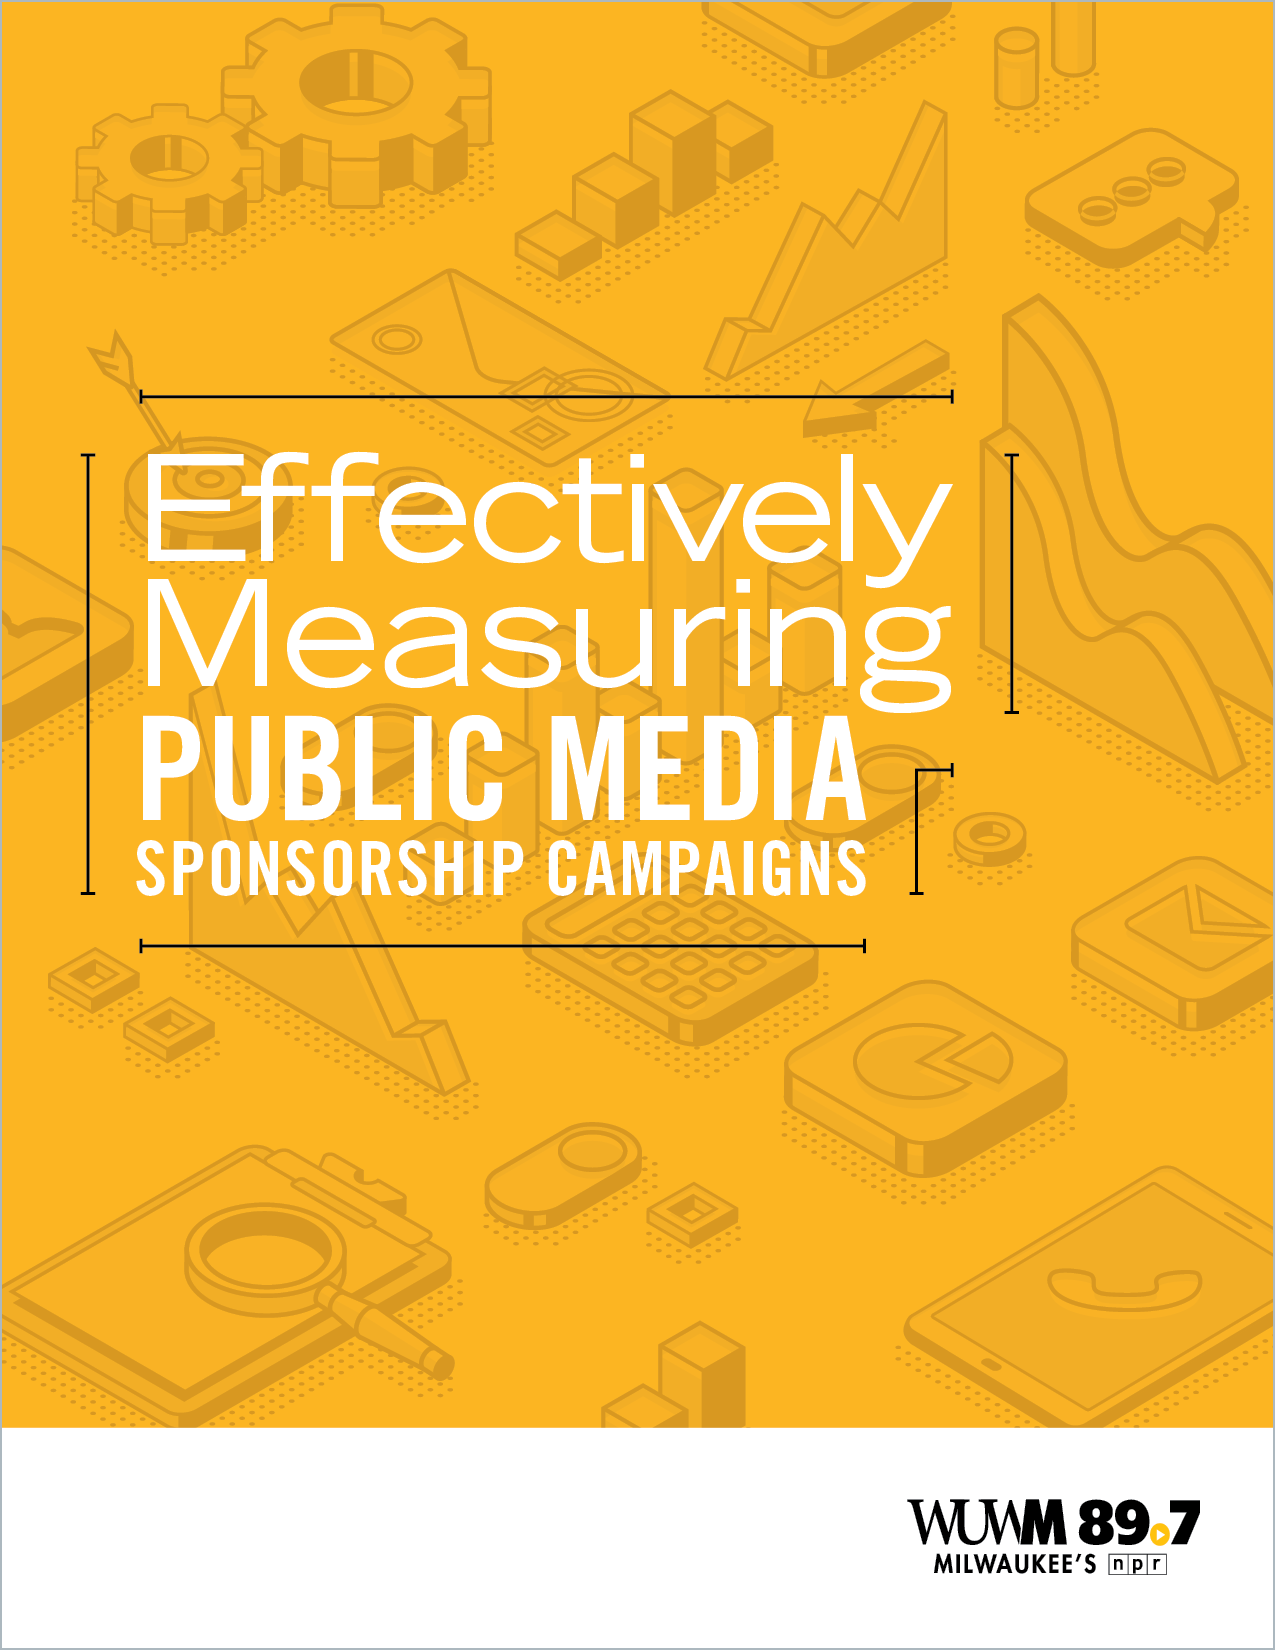 MKE_Effectively Measuring Public Media Sponsorship Campaigns_040822